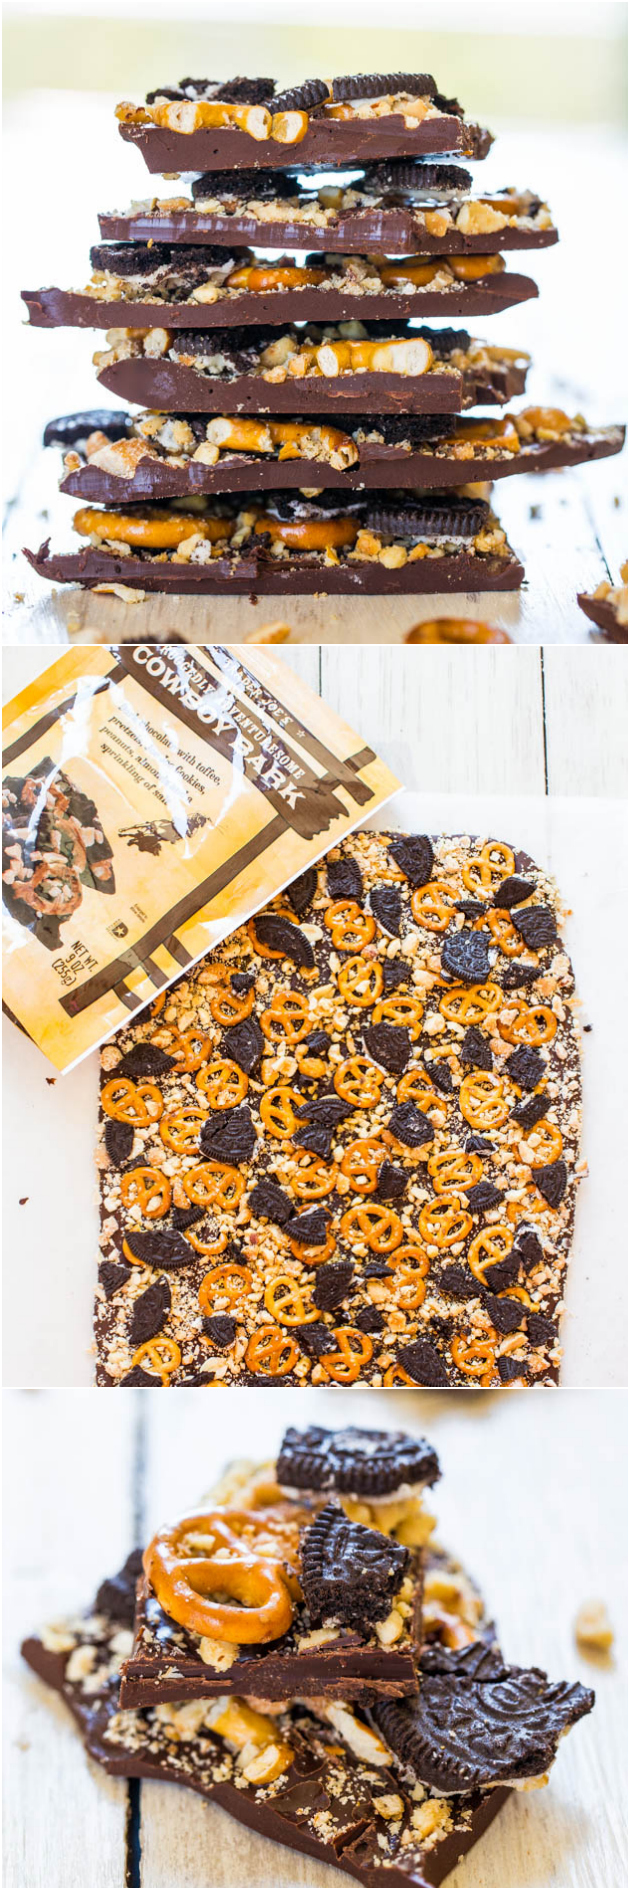 Cowboy Bark: Trader Joe's Copycat Recipe - Just like the real thing & ready in 5 minutes. Salty-and-sweet & supremely good!